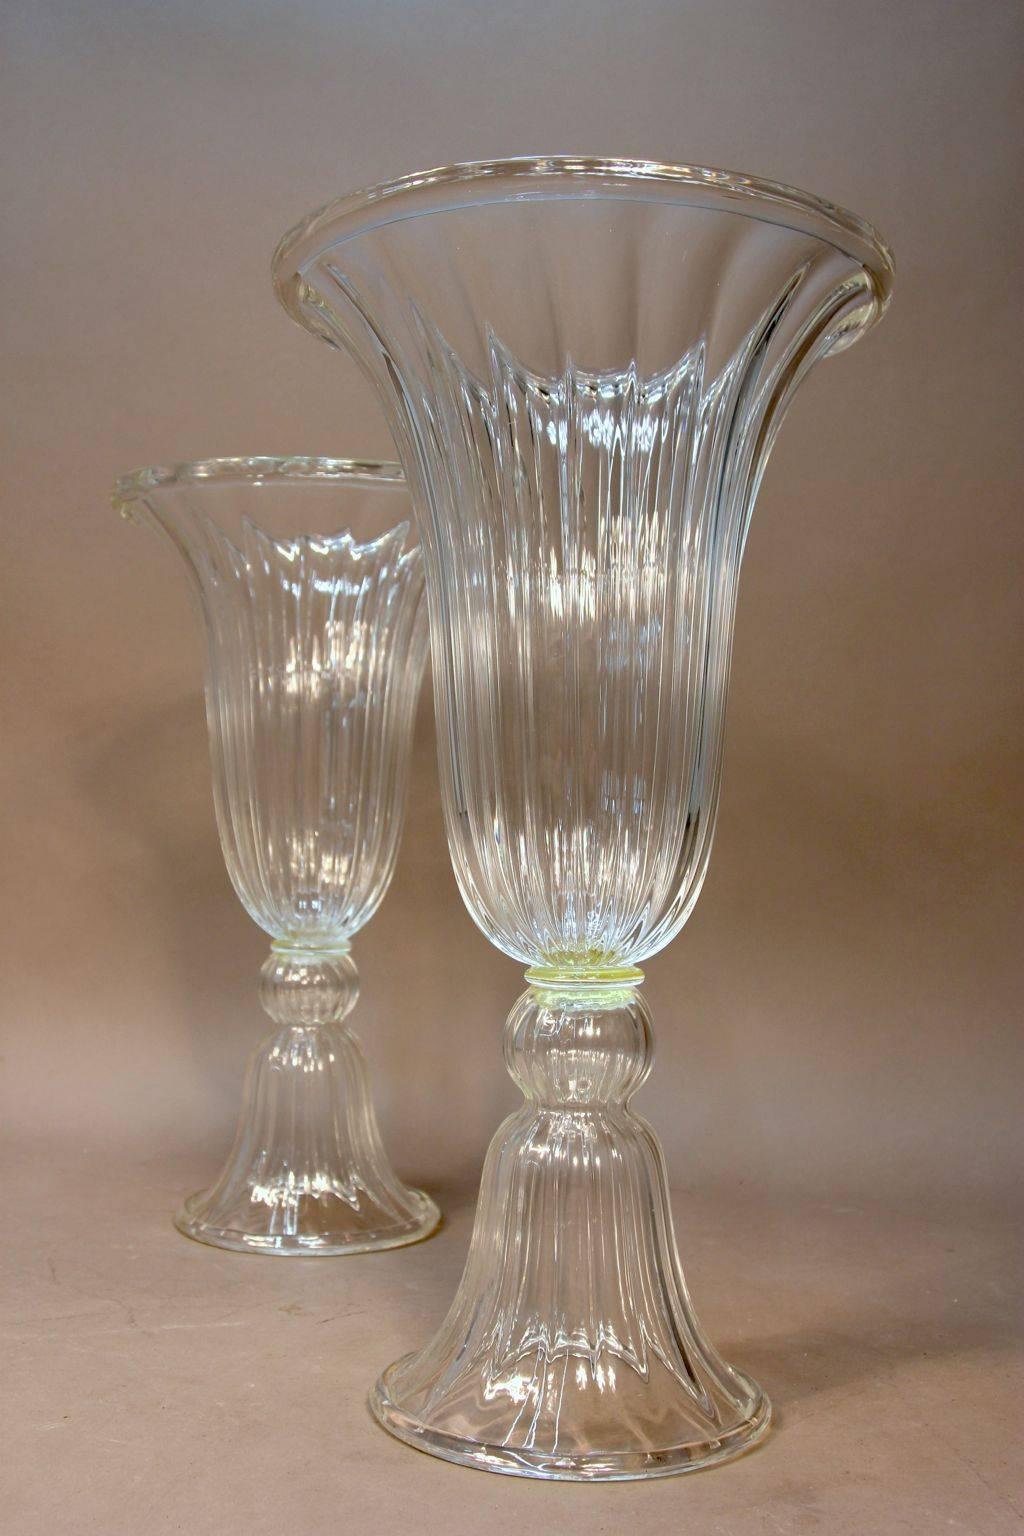 Imposing Pair of Murano Glass Vases In Excellent Condition For Sale In Bridport, CT